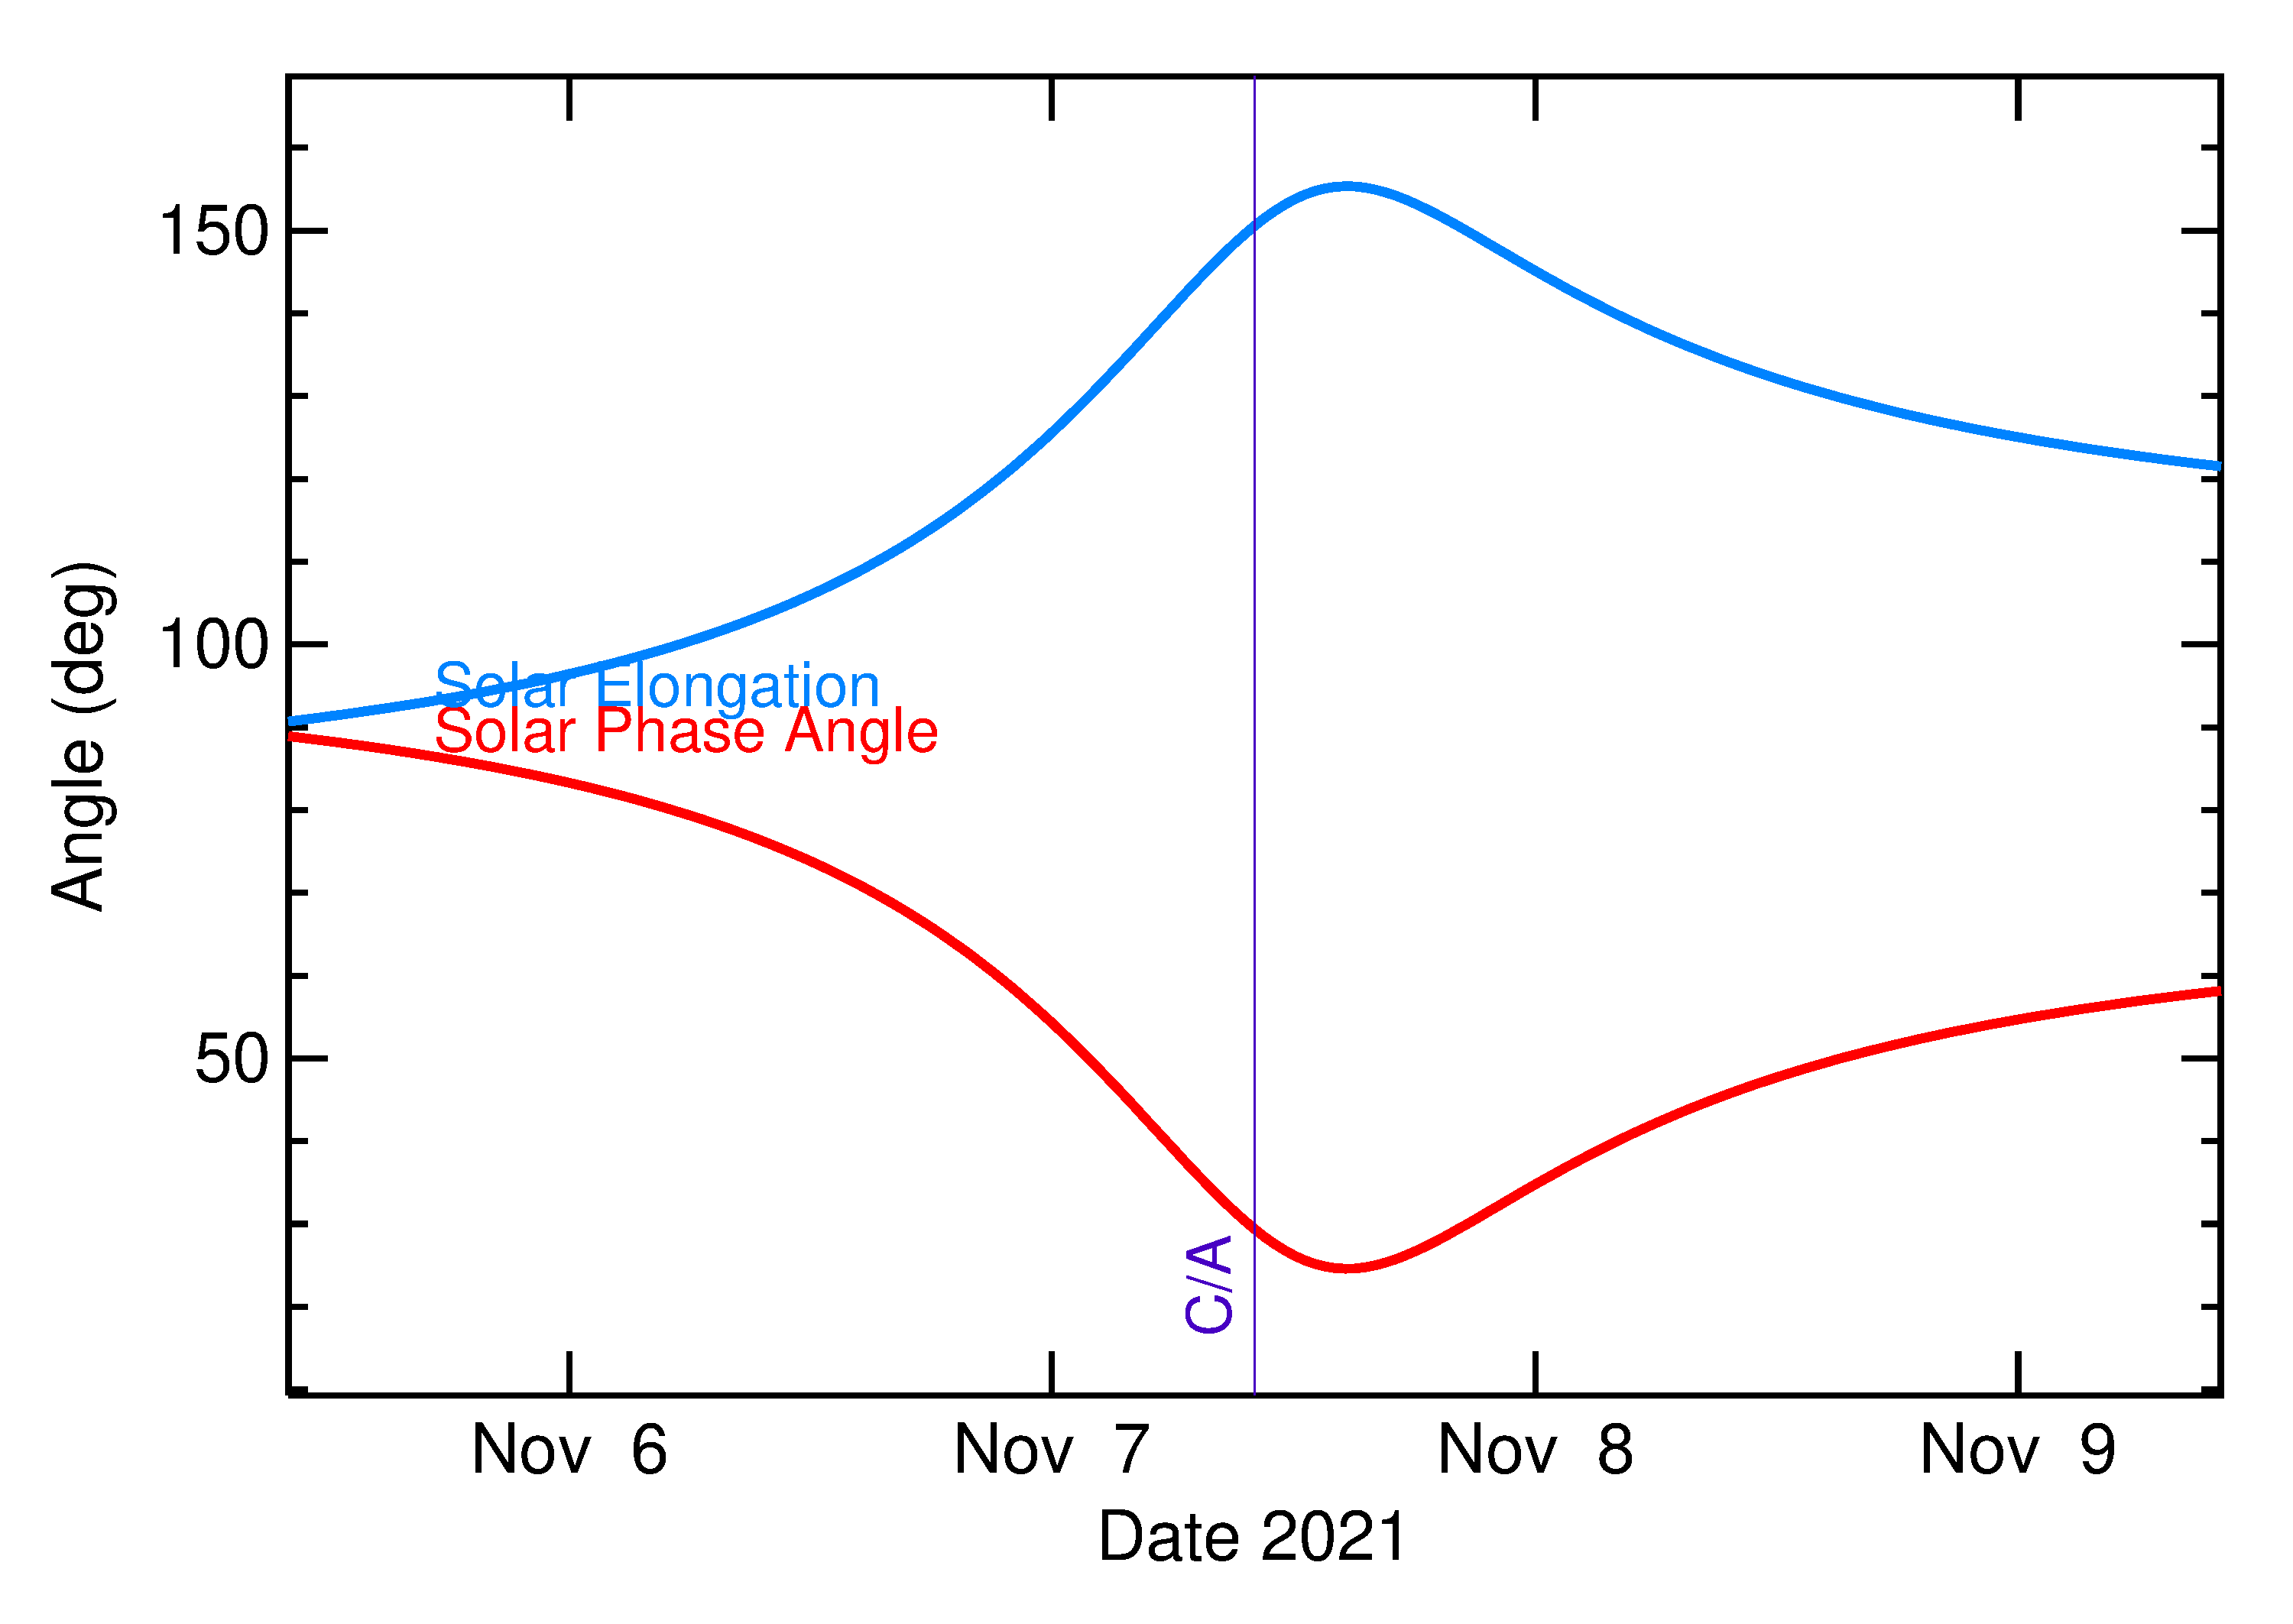 Solar Elongation and Solar Phase Angle of 2021 VS11 in the days around closest approach